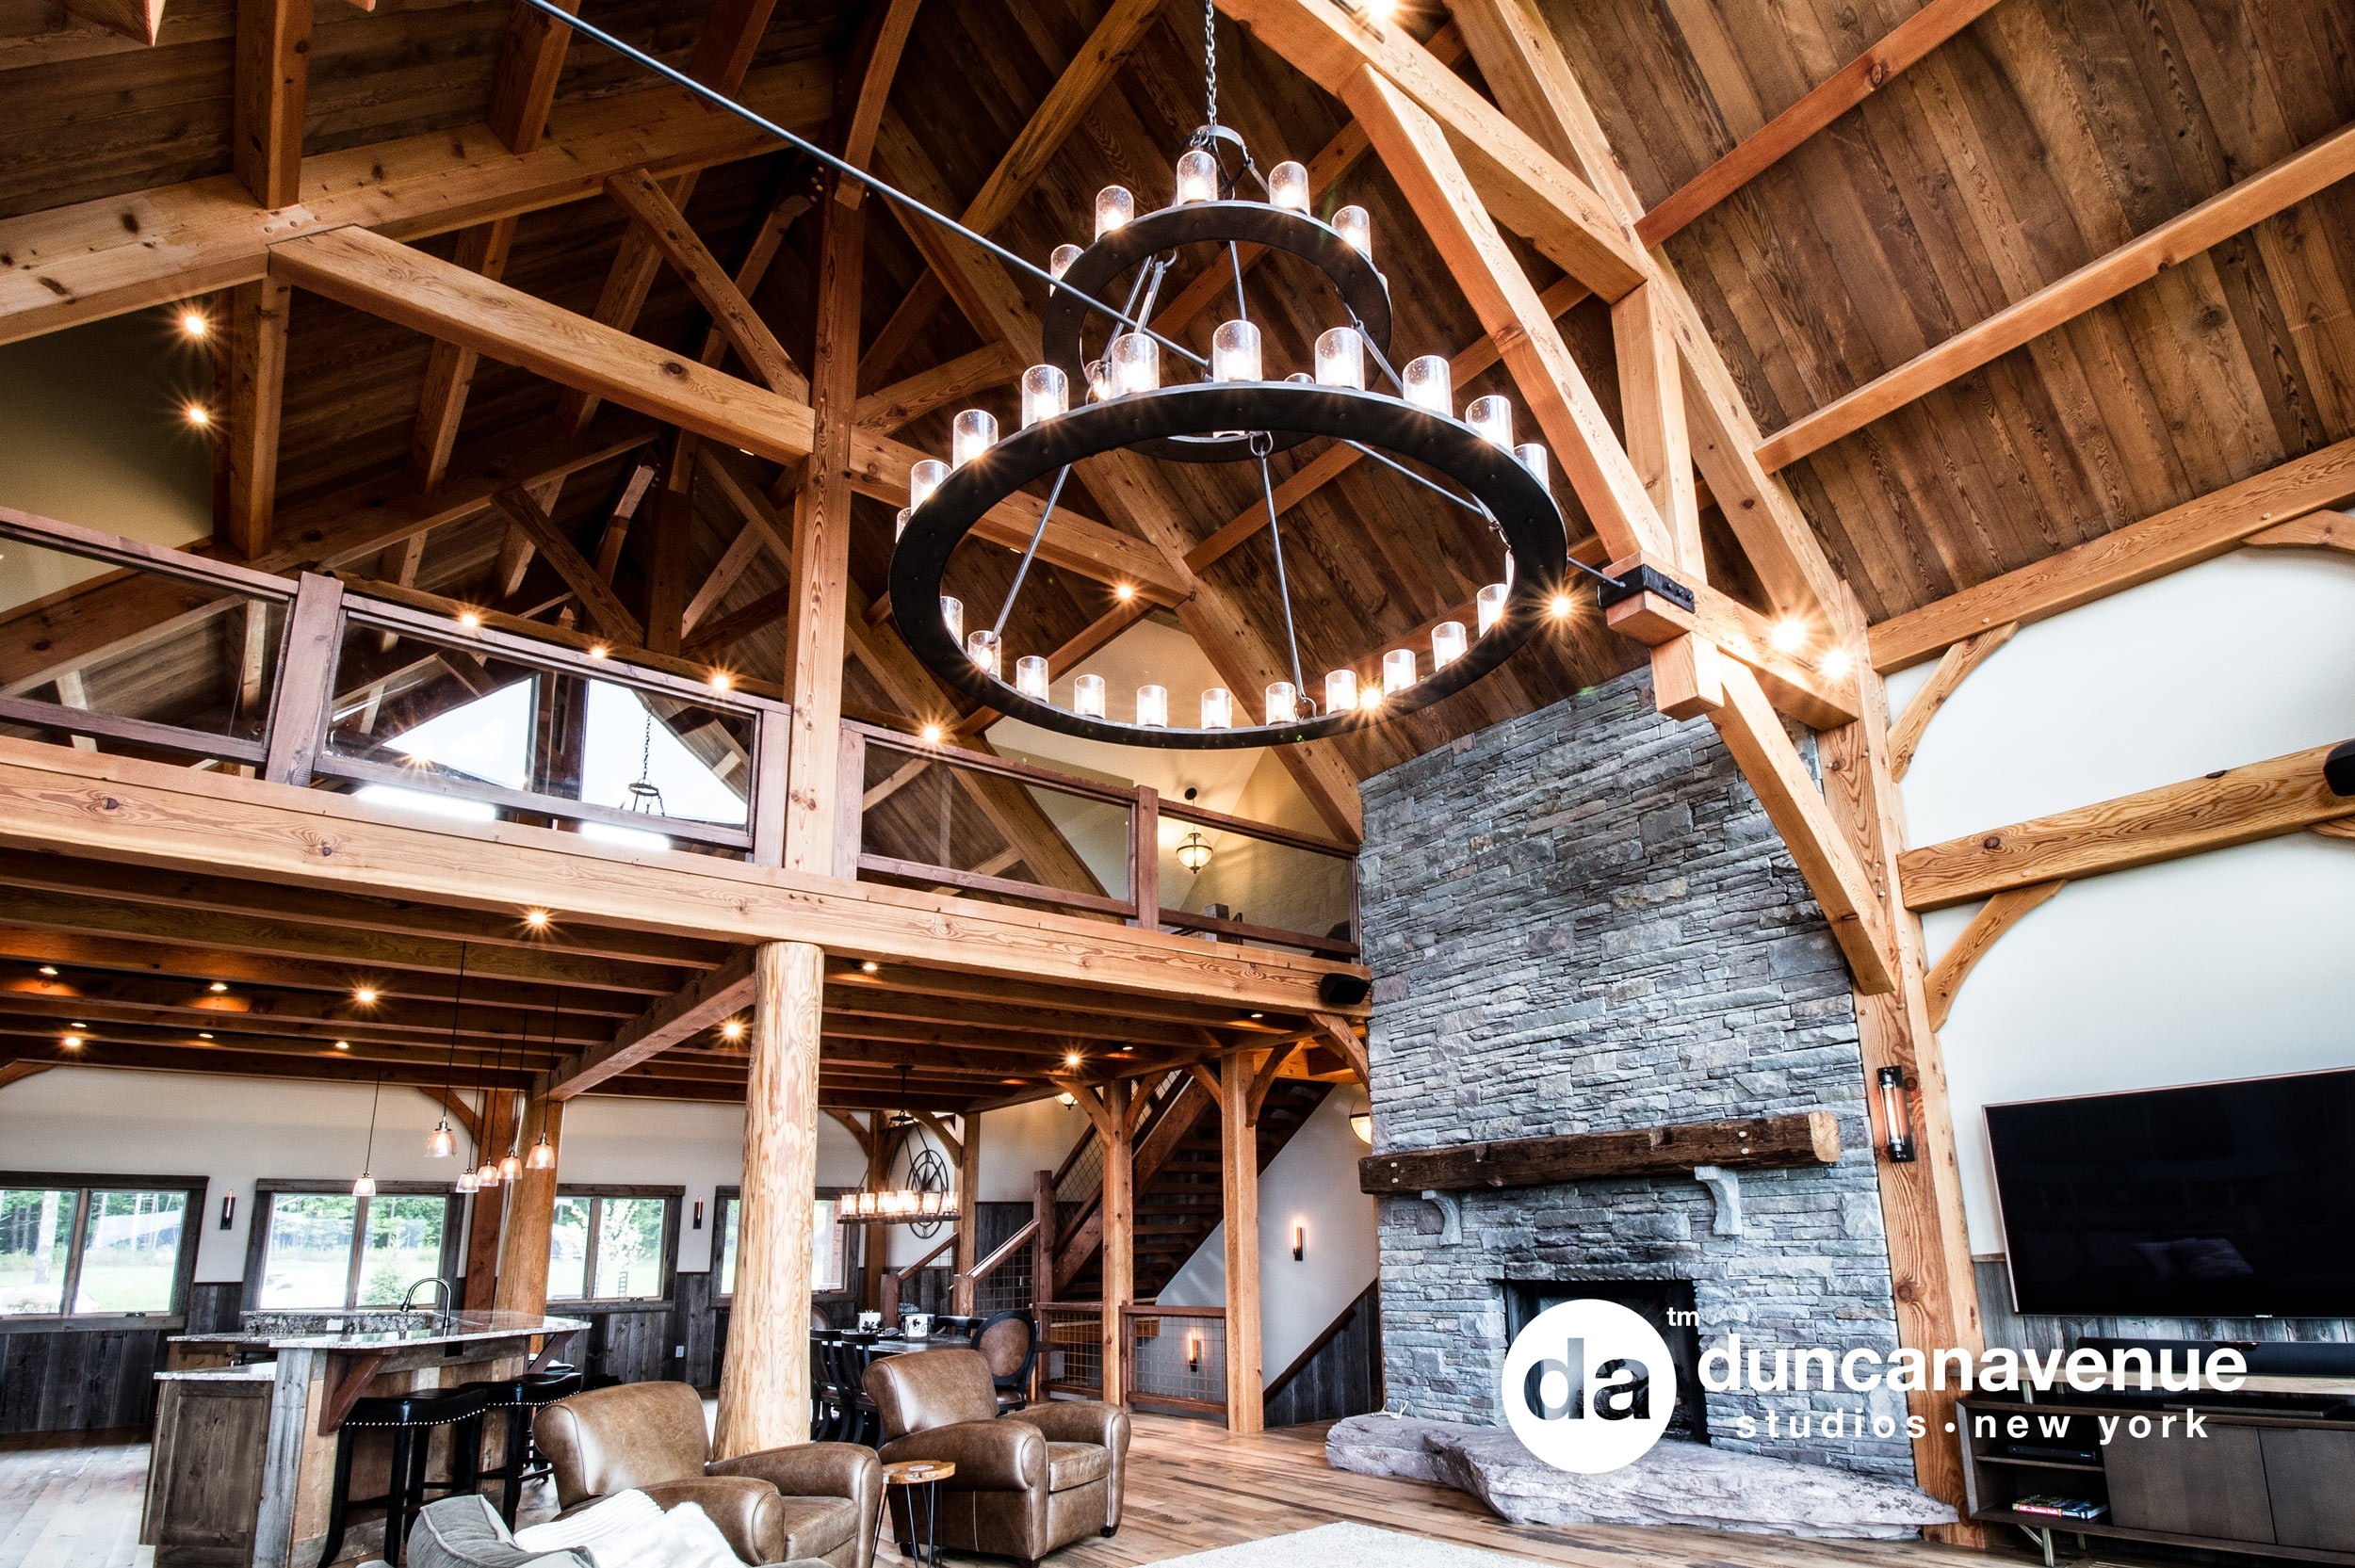 Choosing Decor for Your Hudson Valley Lodge or Cabin With a Rustic Theme by Designer Maxwell L. Alexander (Editor-in-Chief, Hudson Valley Style Magazine)